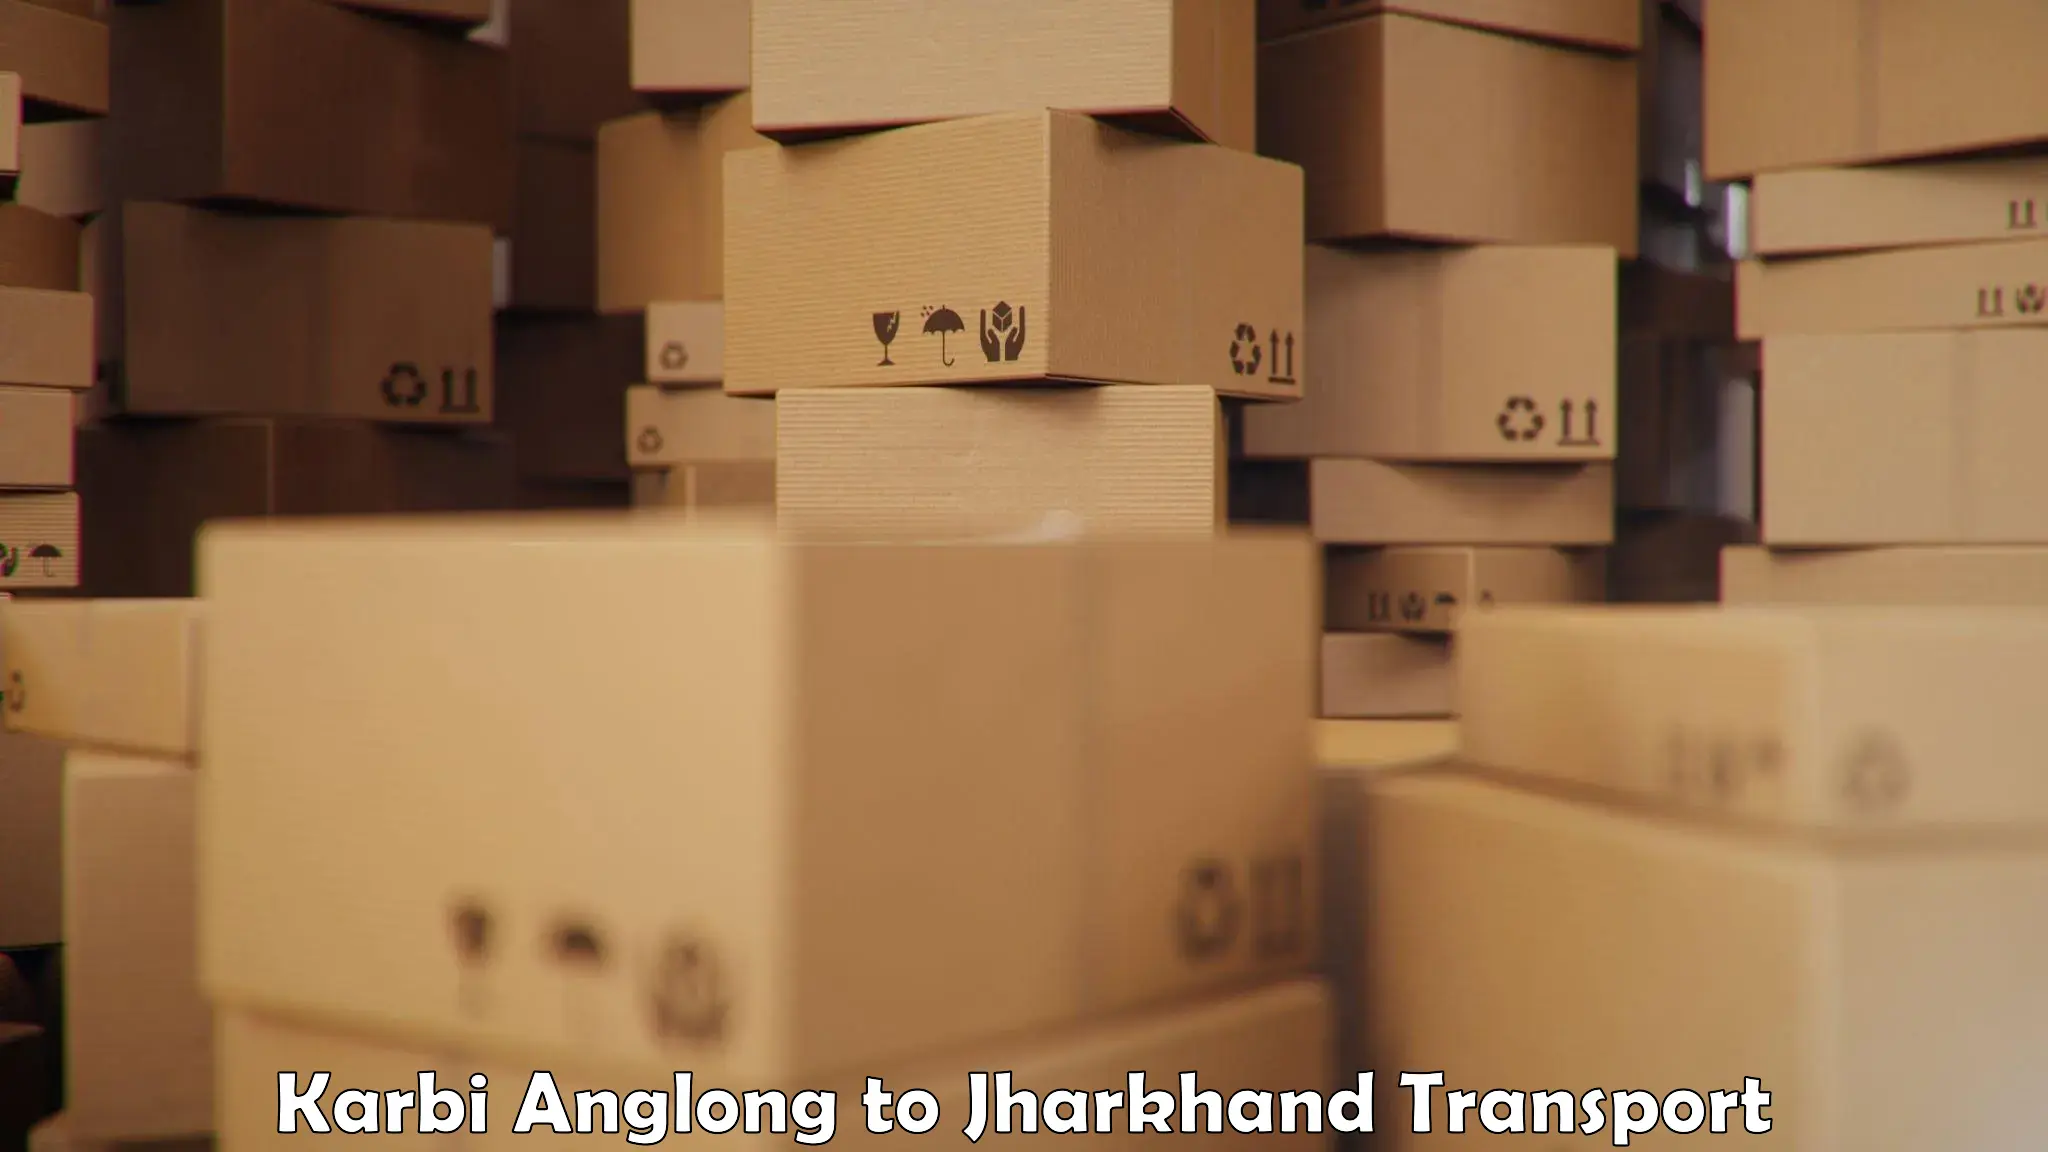 Logistics transportation services in Karbi Anglong to Chandwa